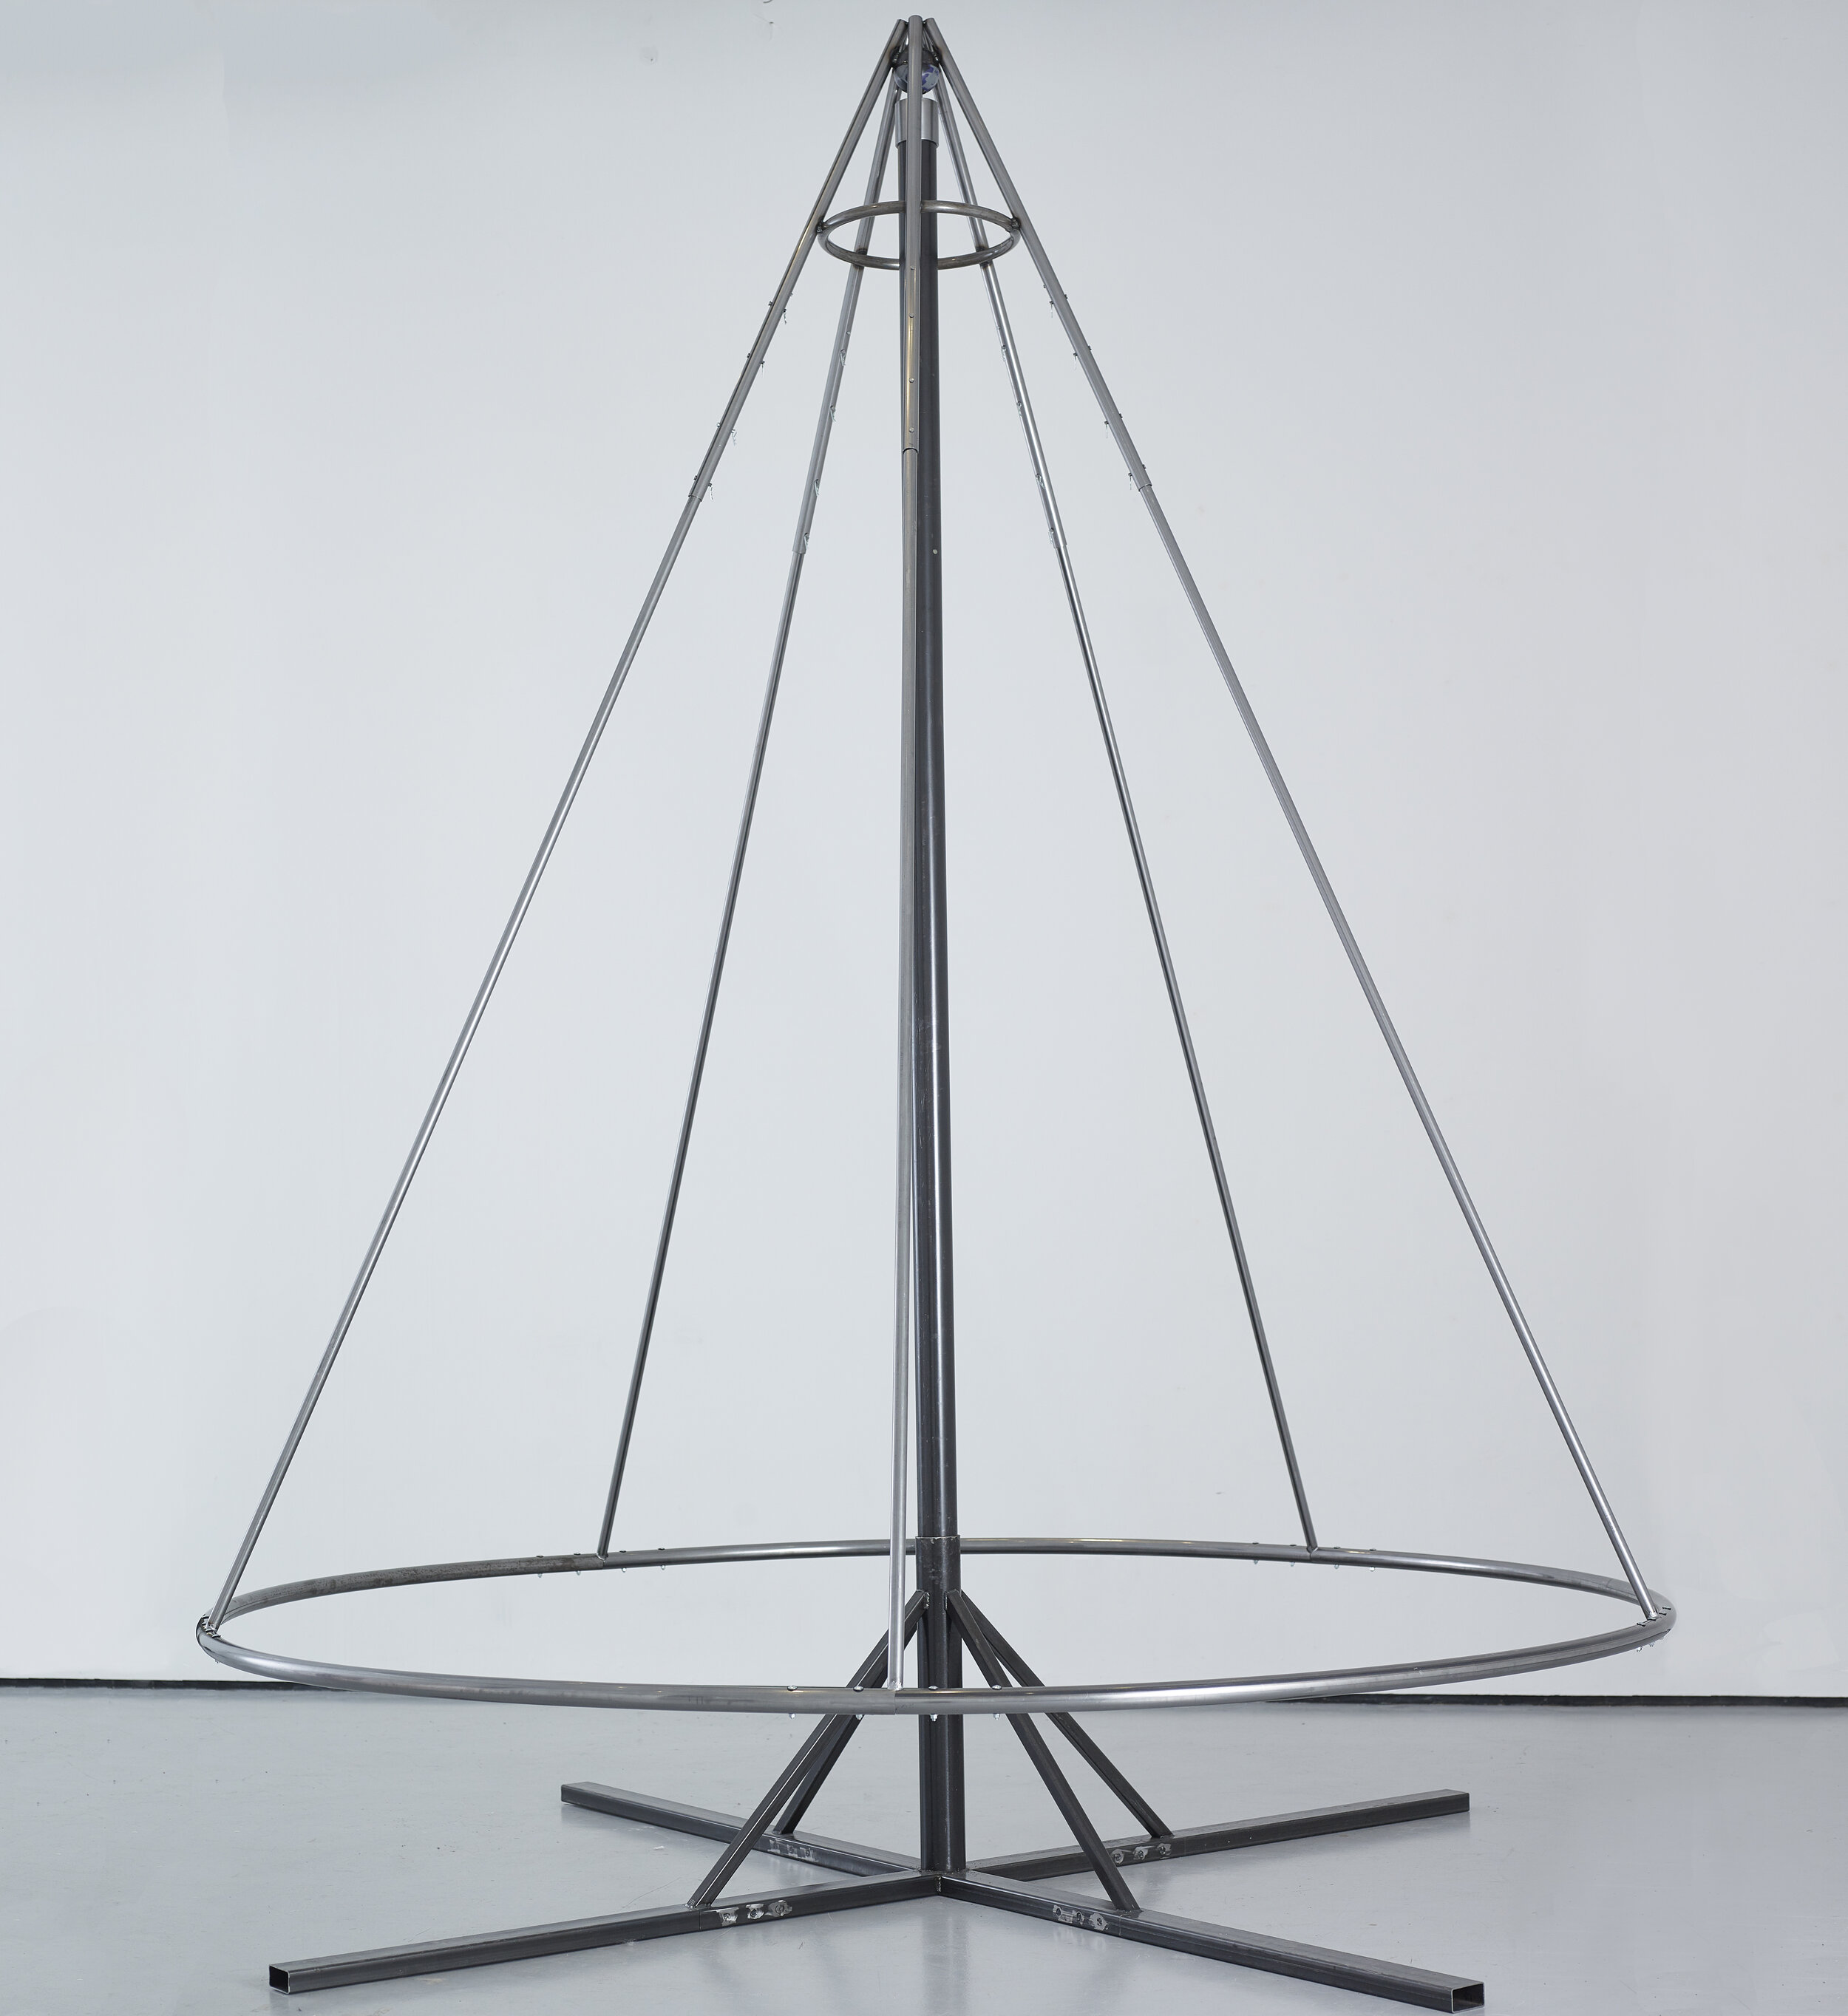  Anna Miller  GO ROUND , 2020 Steel and duck pin bowling ball 192 x 144 inches (488 x 366 cm)  Photo by Merik Goma Photography 